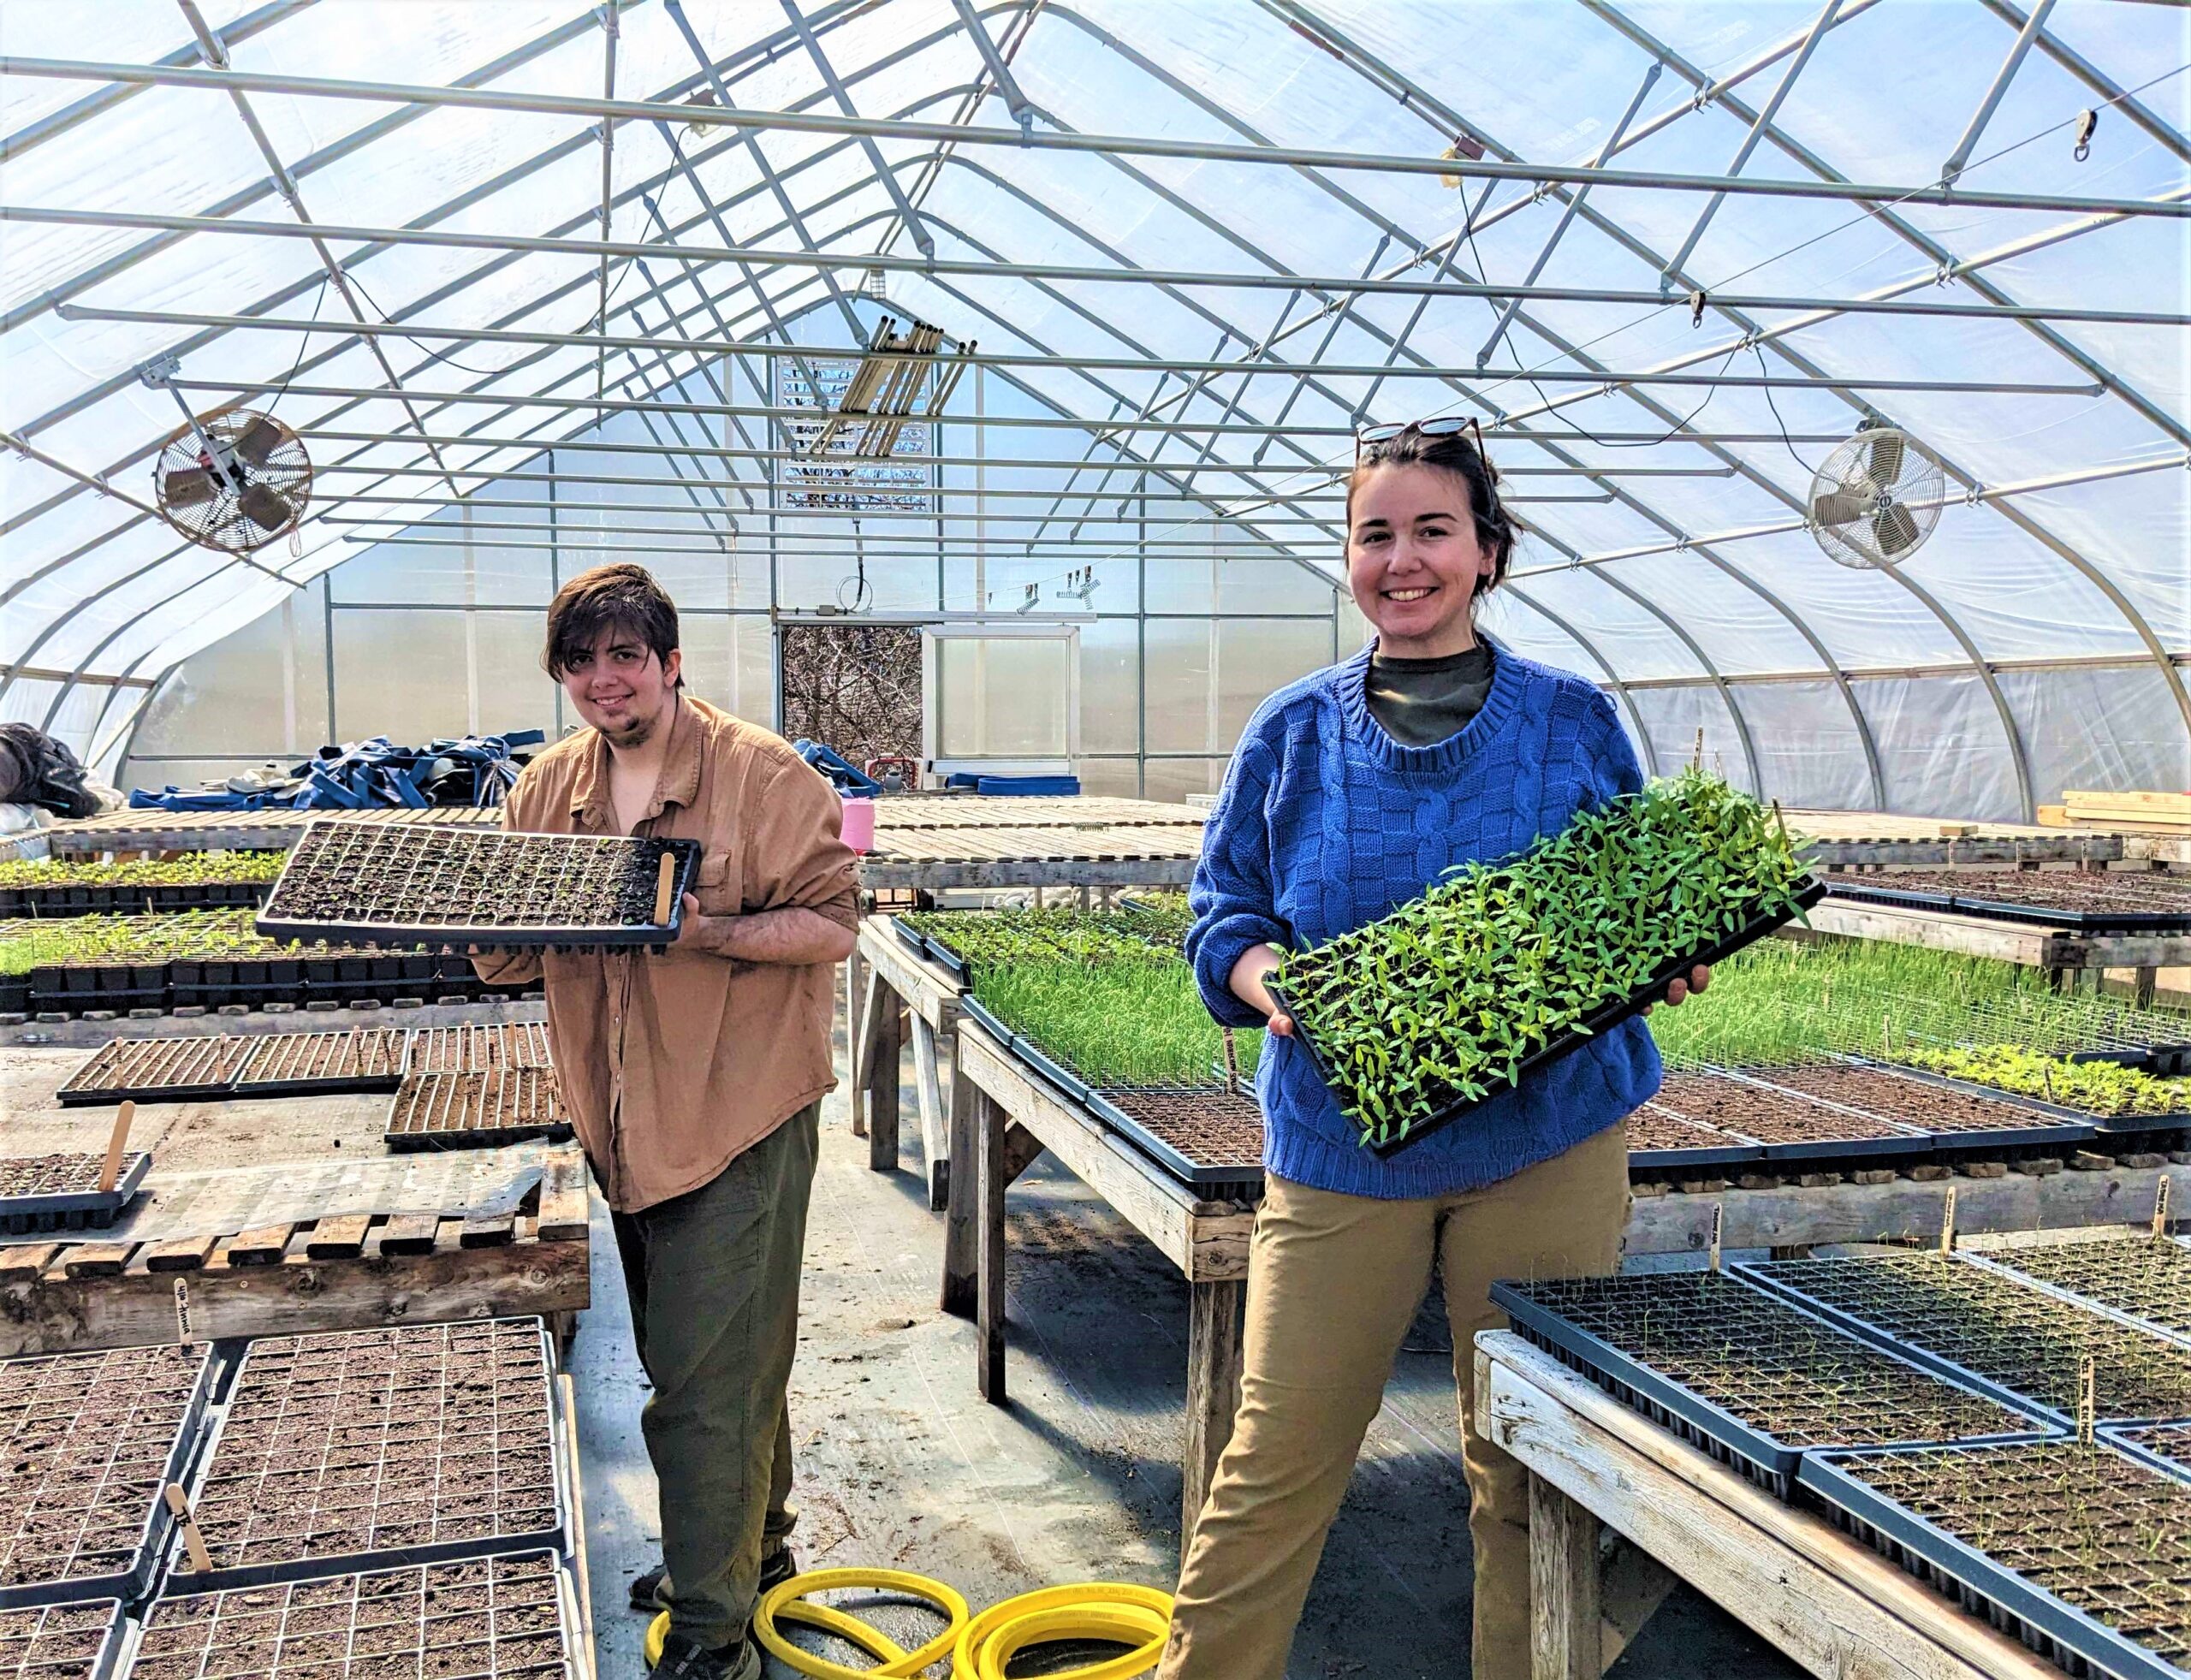 Trustees Farm staff prepare field plants in the greenhouse for planting in the spring.